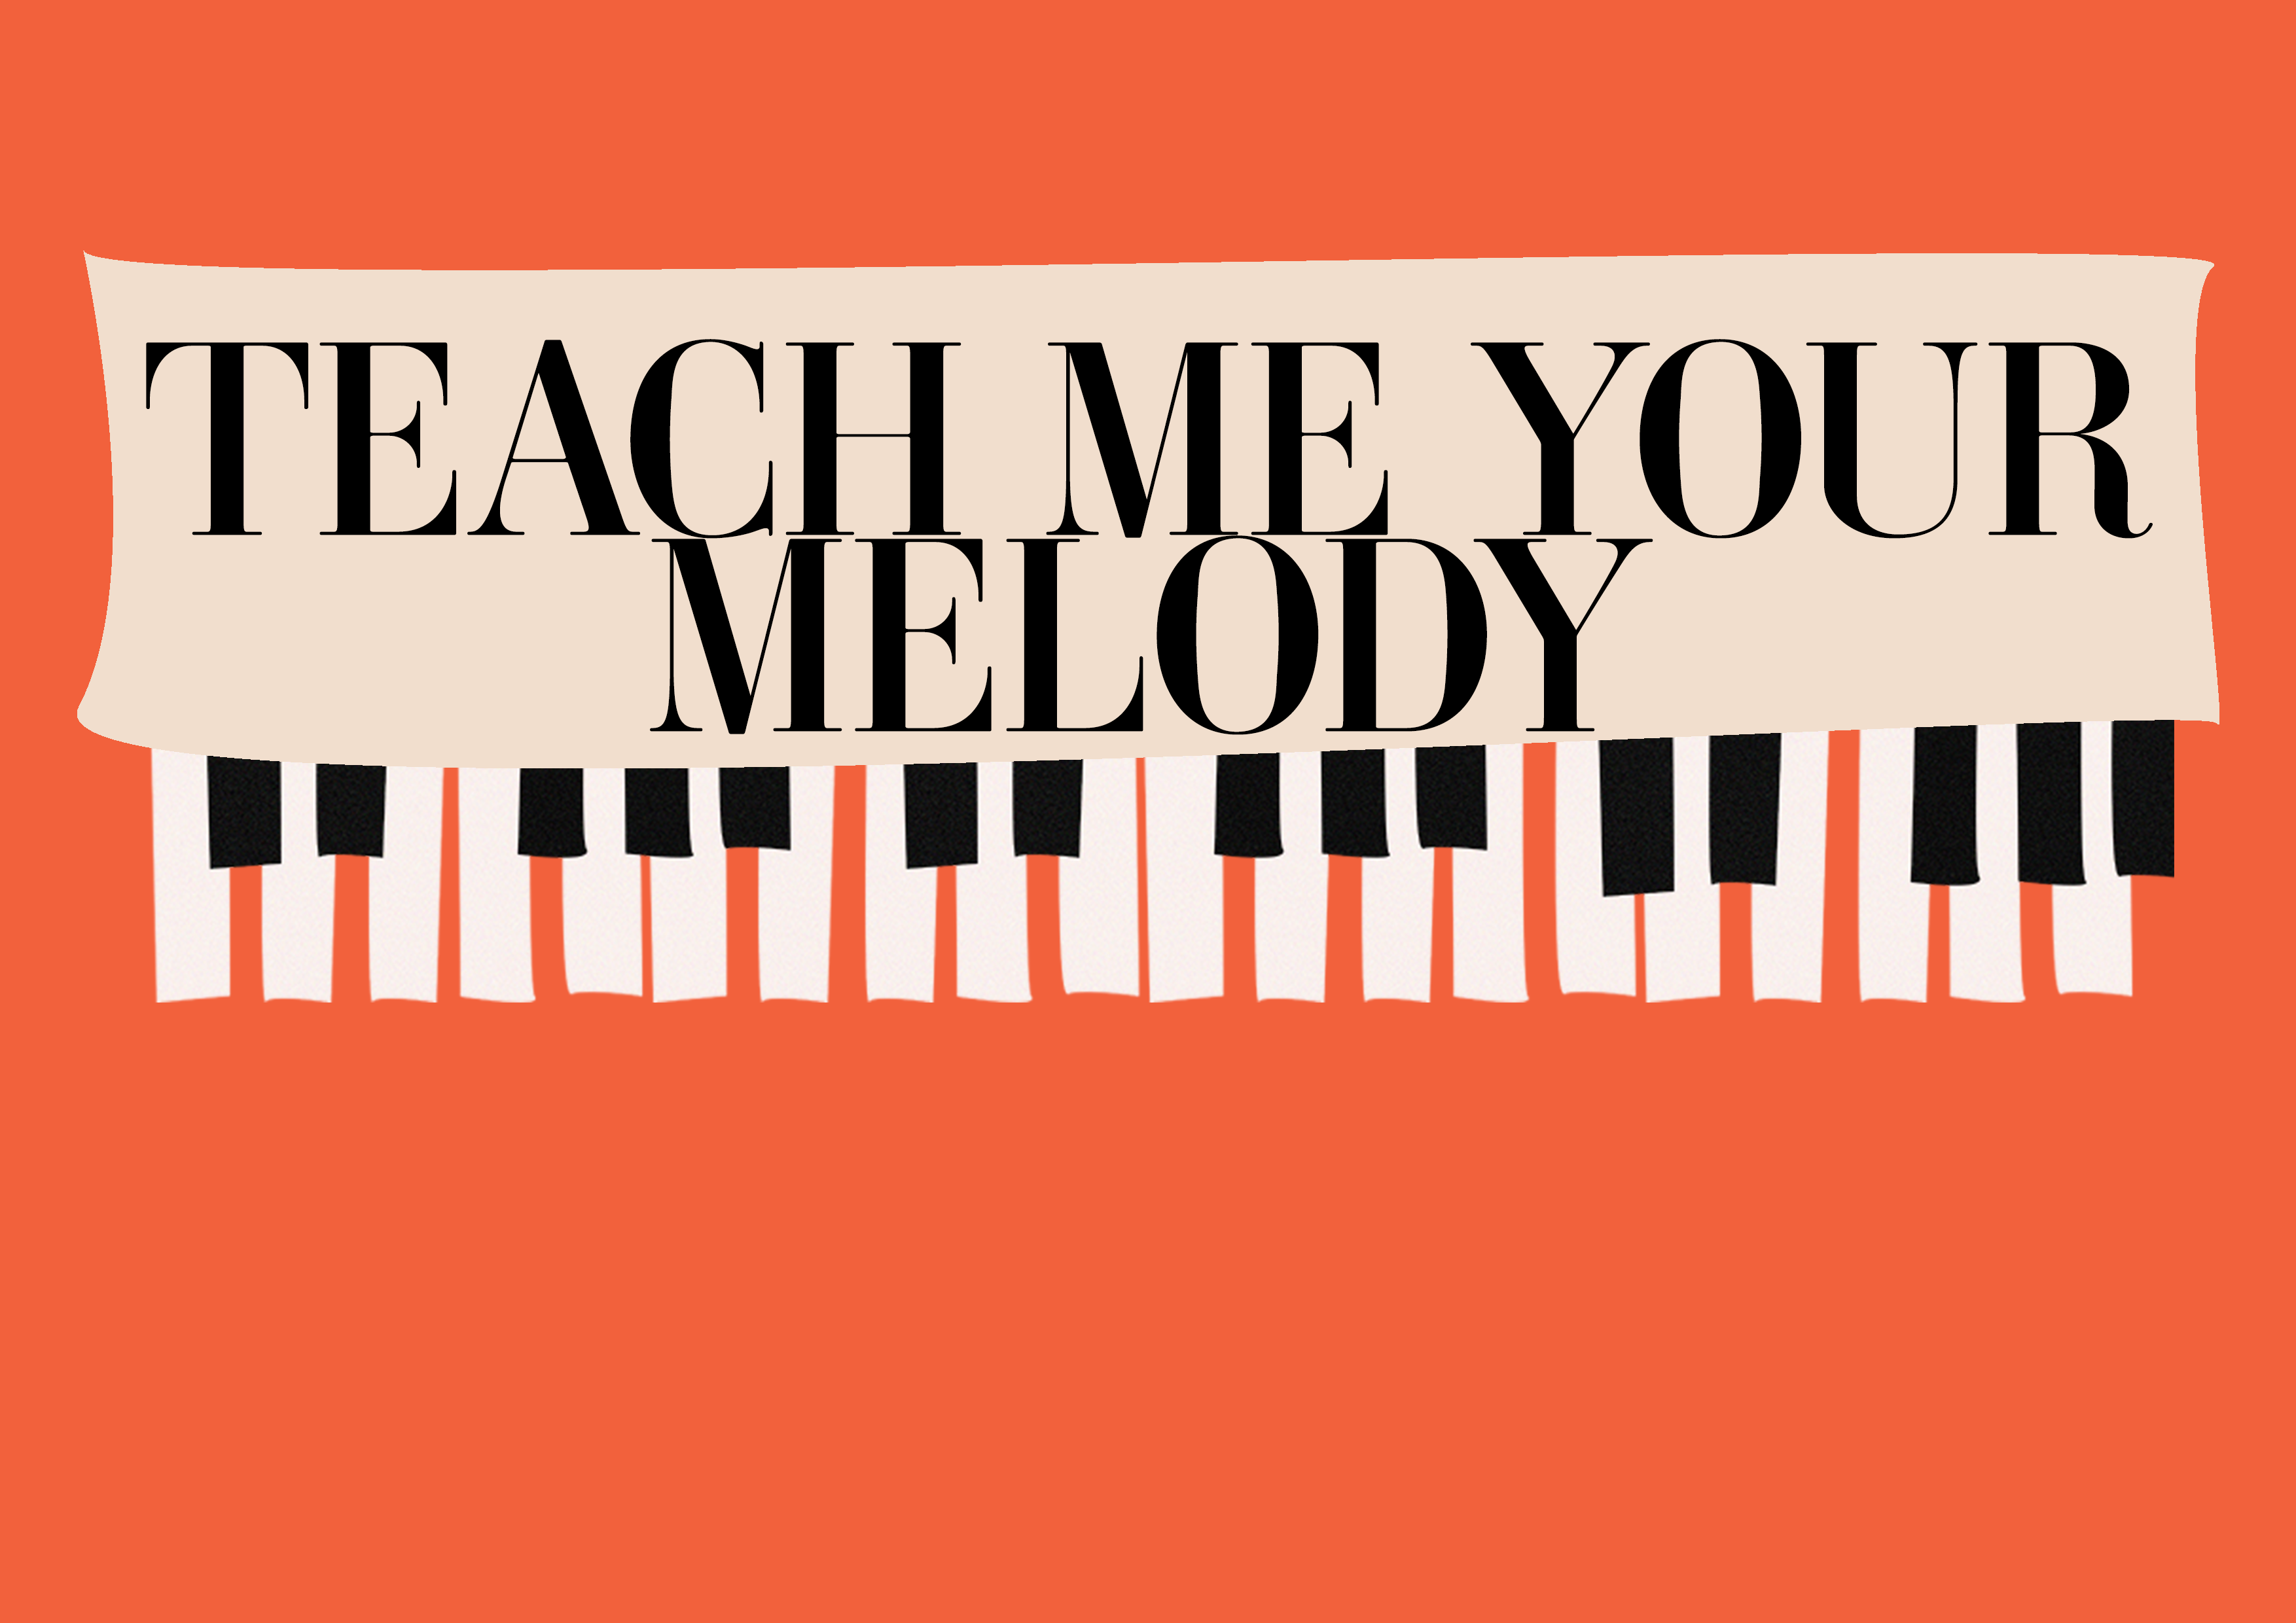 Teach me your melody